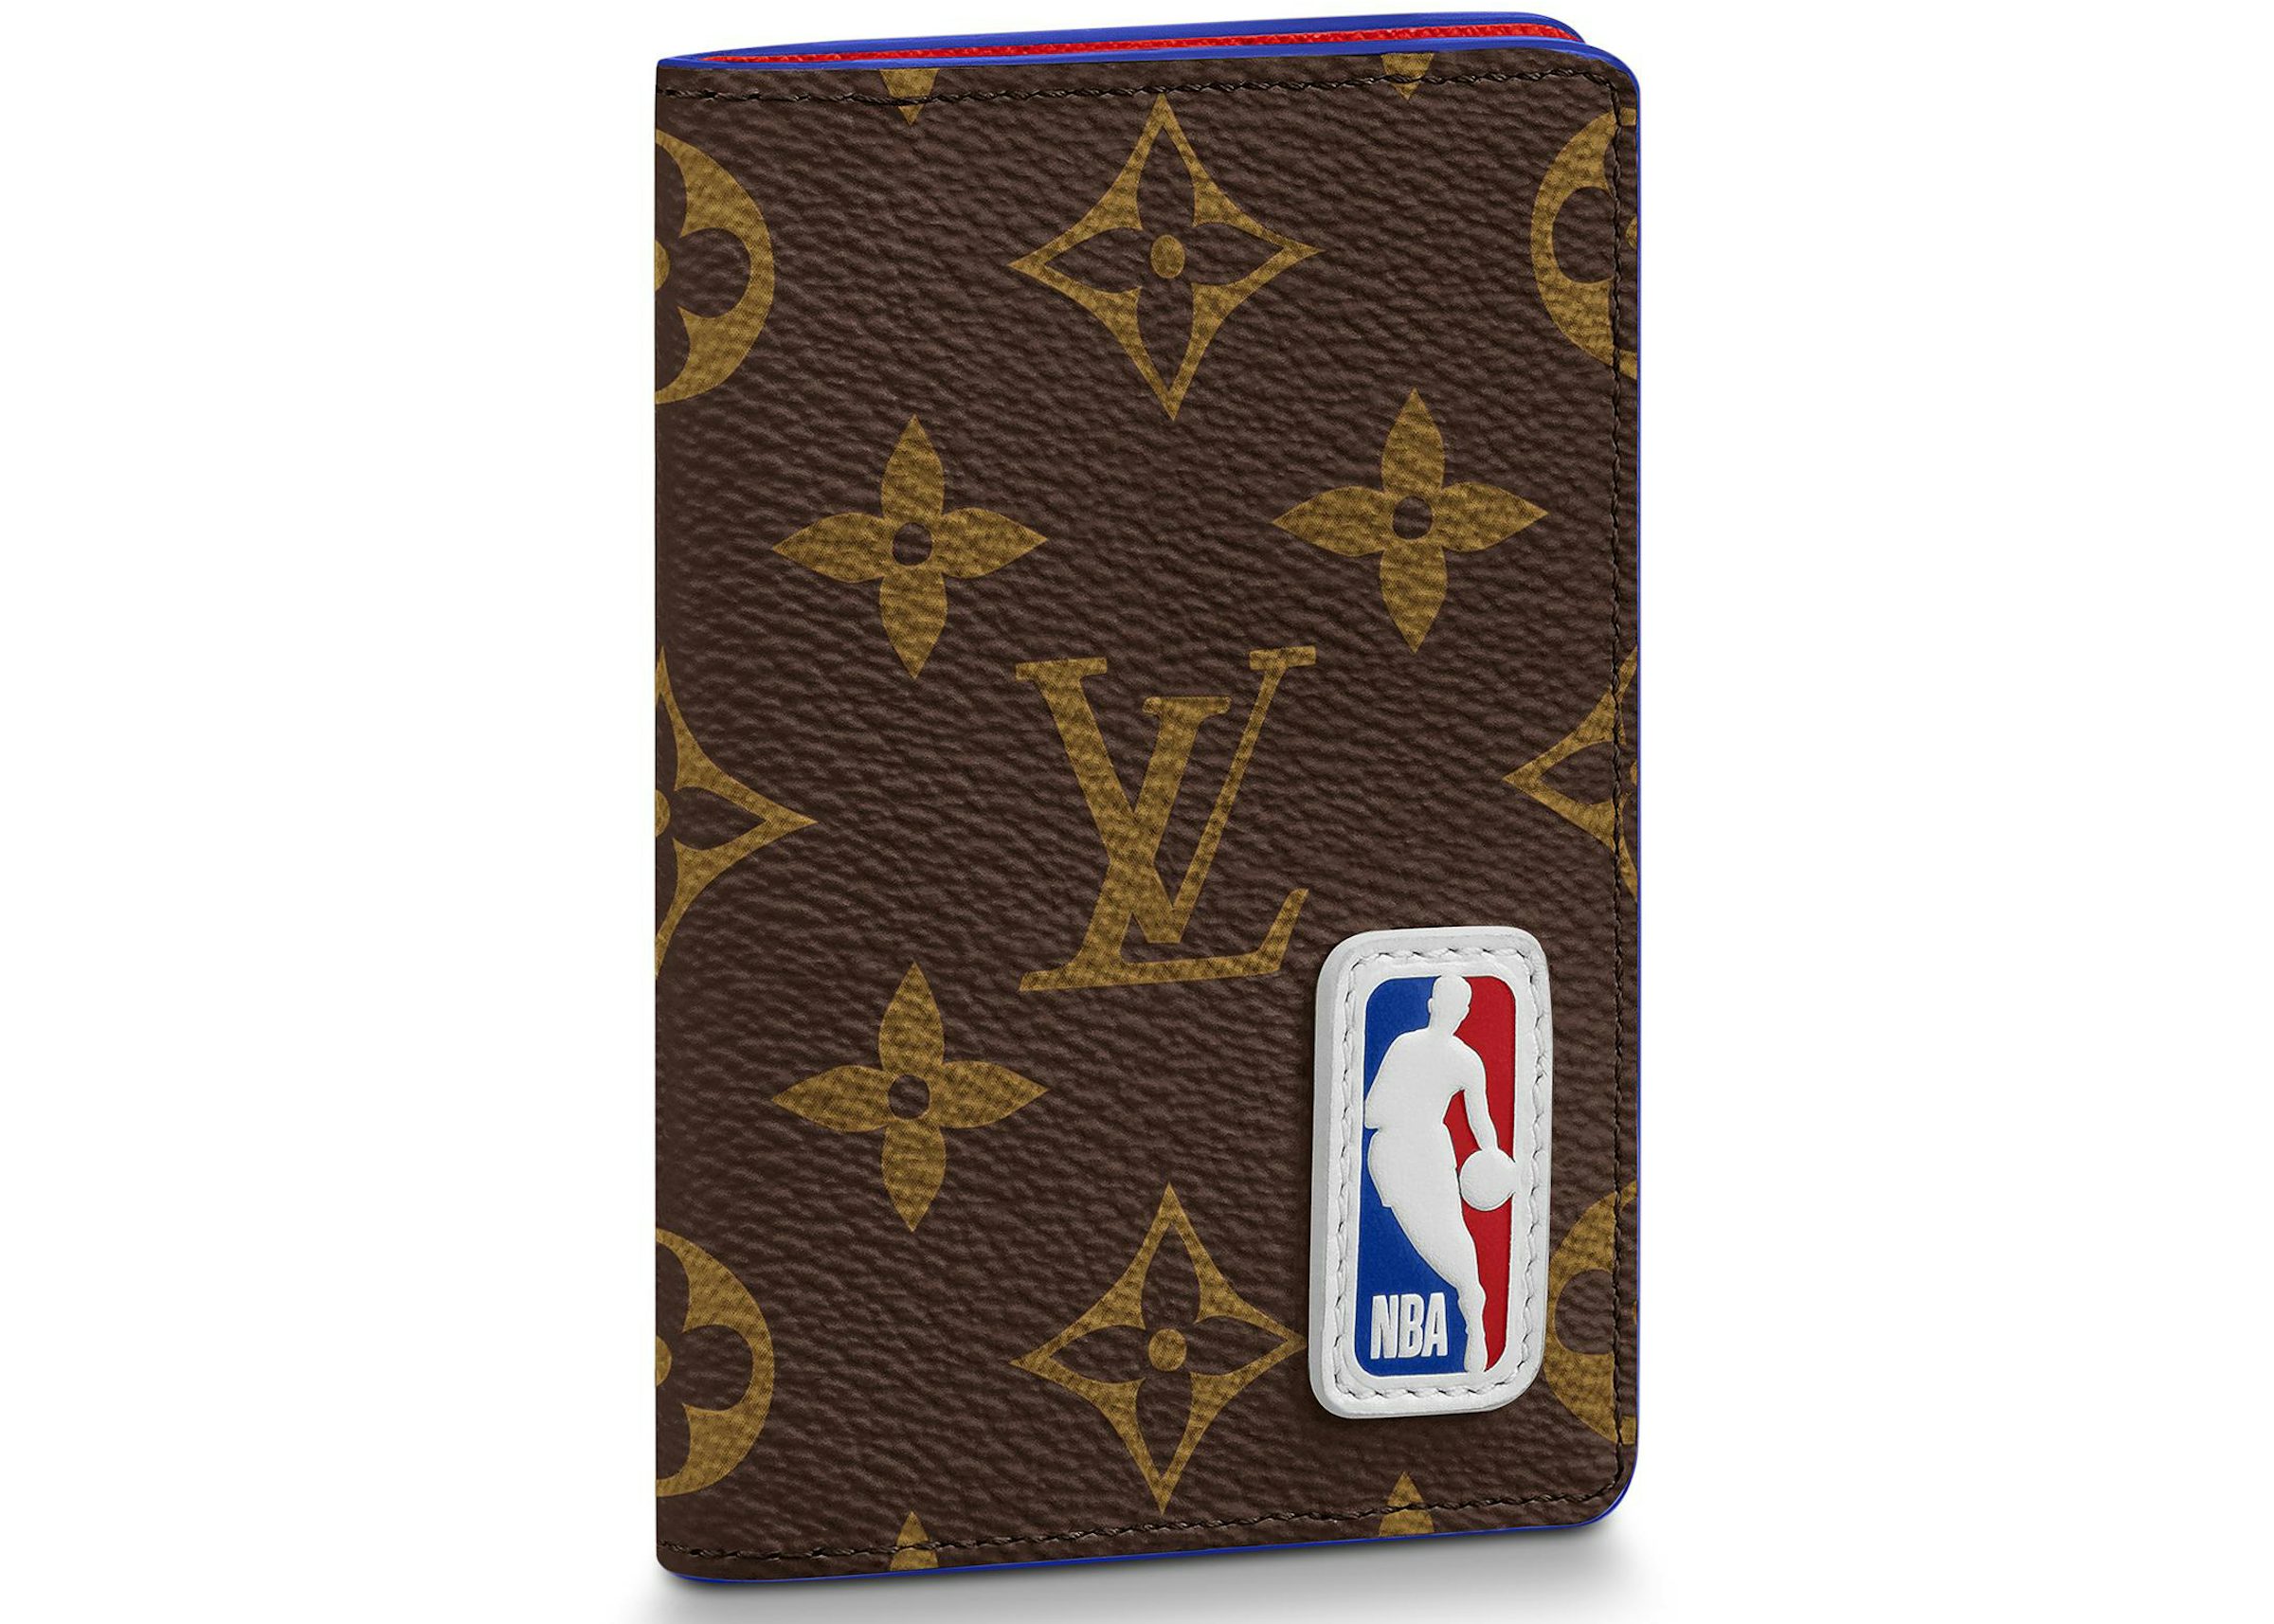 Featuring a white Monogram coated canvas leather with NBA patch